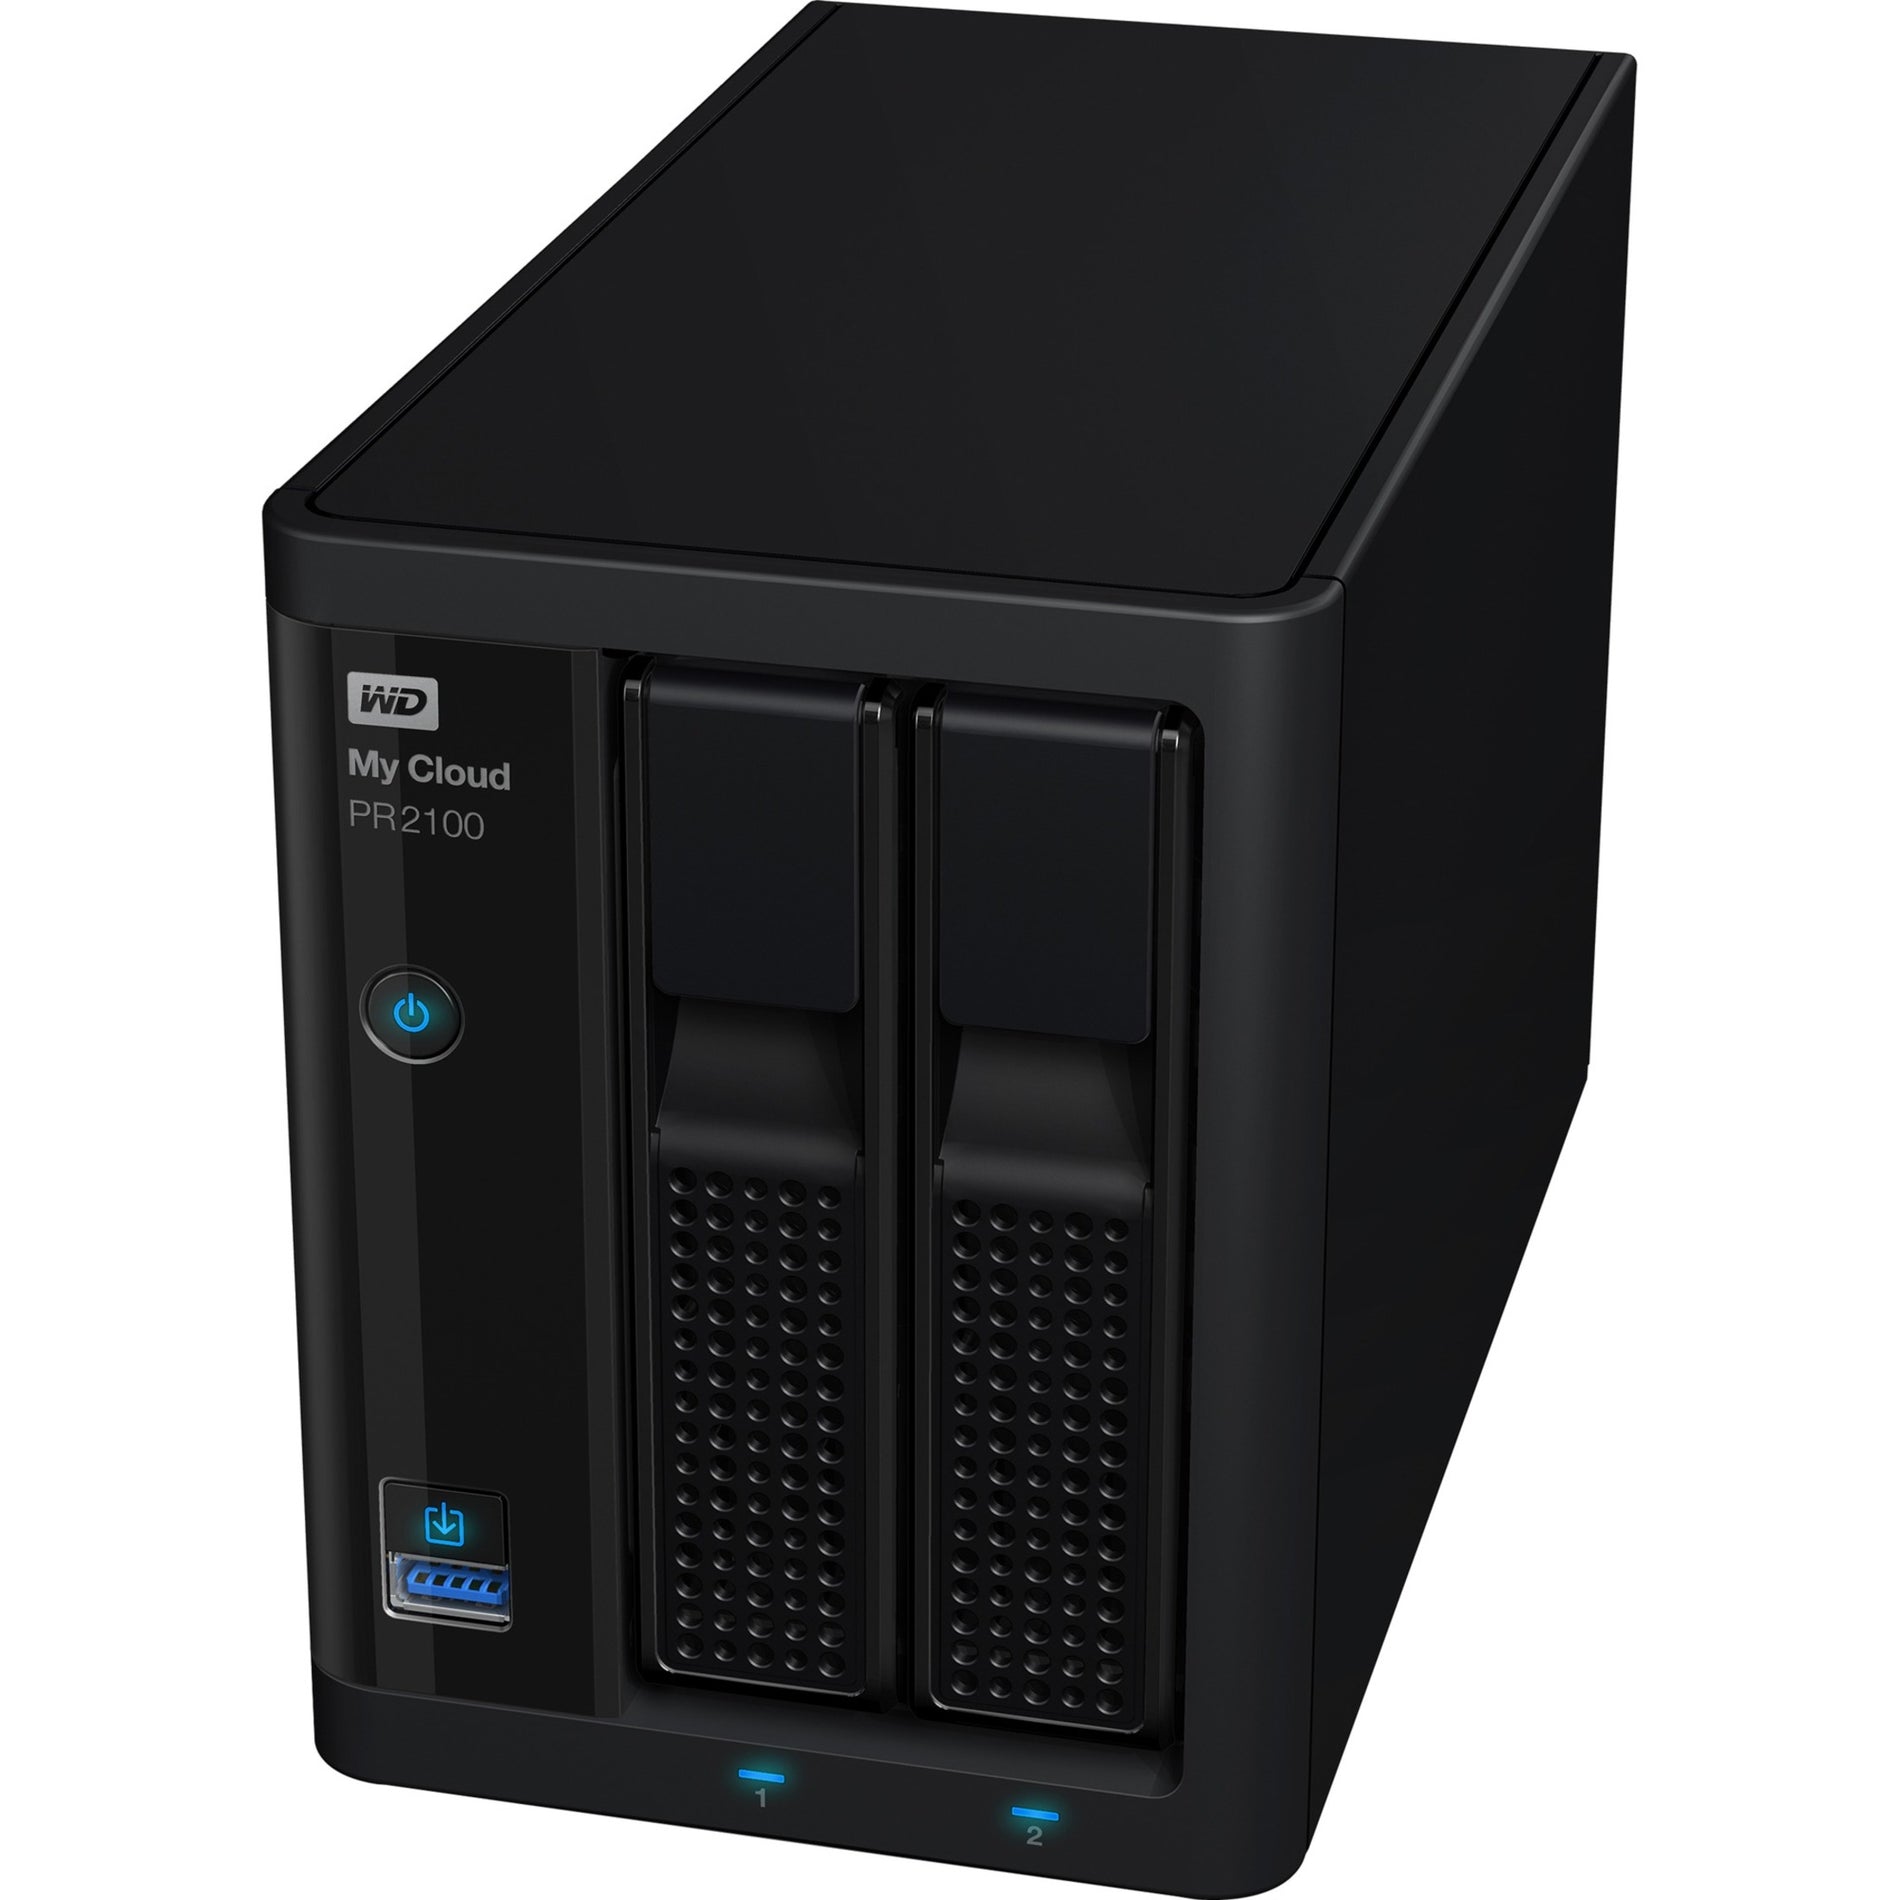 WD WDBBCL0160JBK-NESN 16TB My Cloud PR2100 Pro Series Media Server with Transcoding, NAS - Network Attached Storage